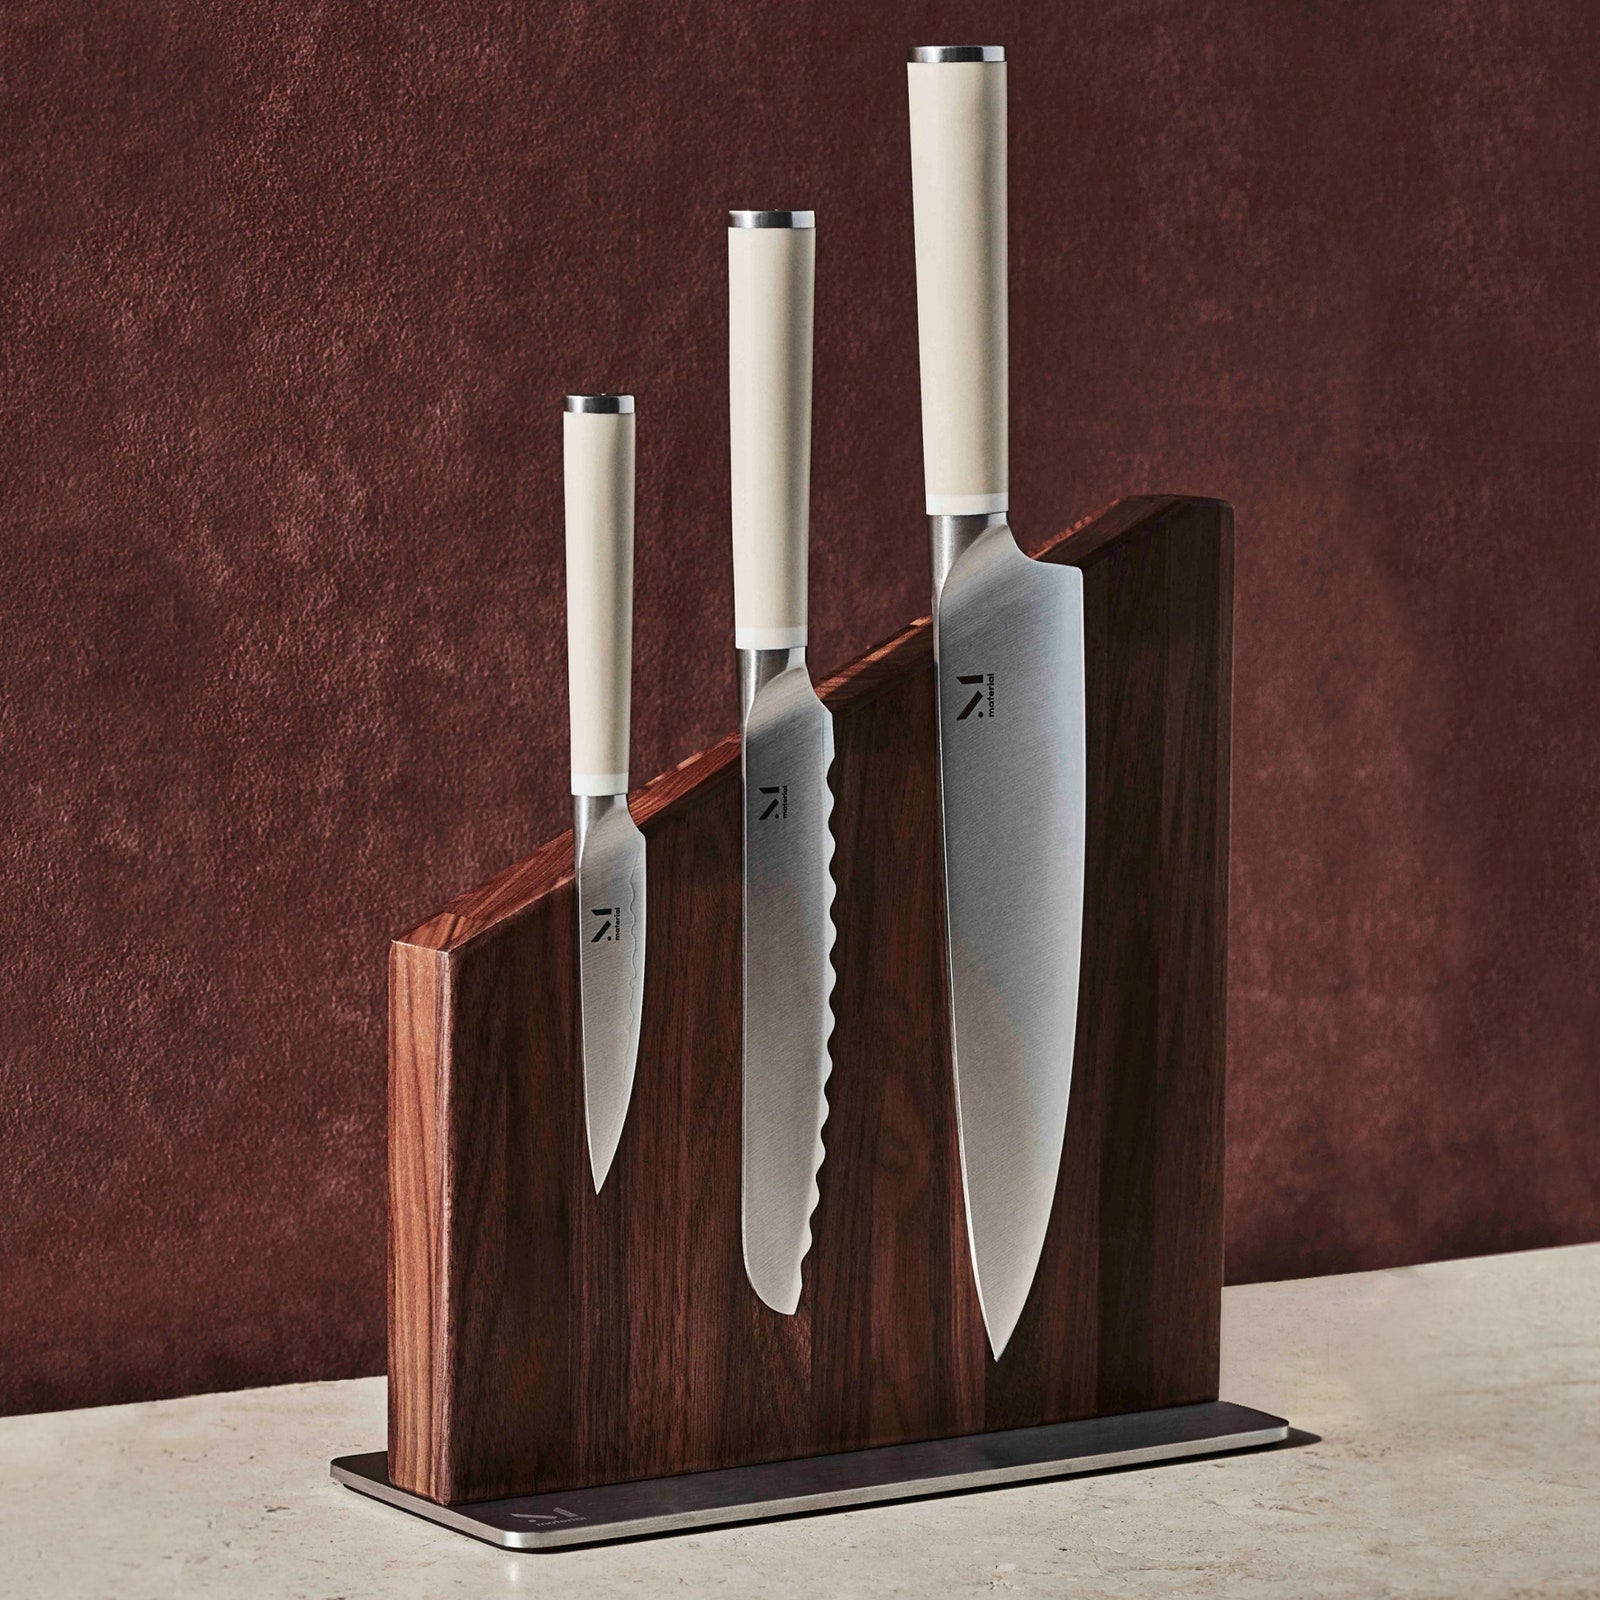 These Knife Sets Are the Perfect Match for Slicing, Dicing, Peeling, and Paring